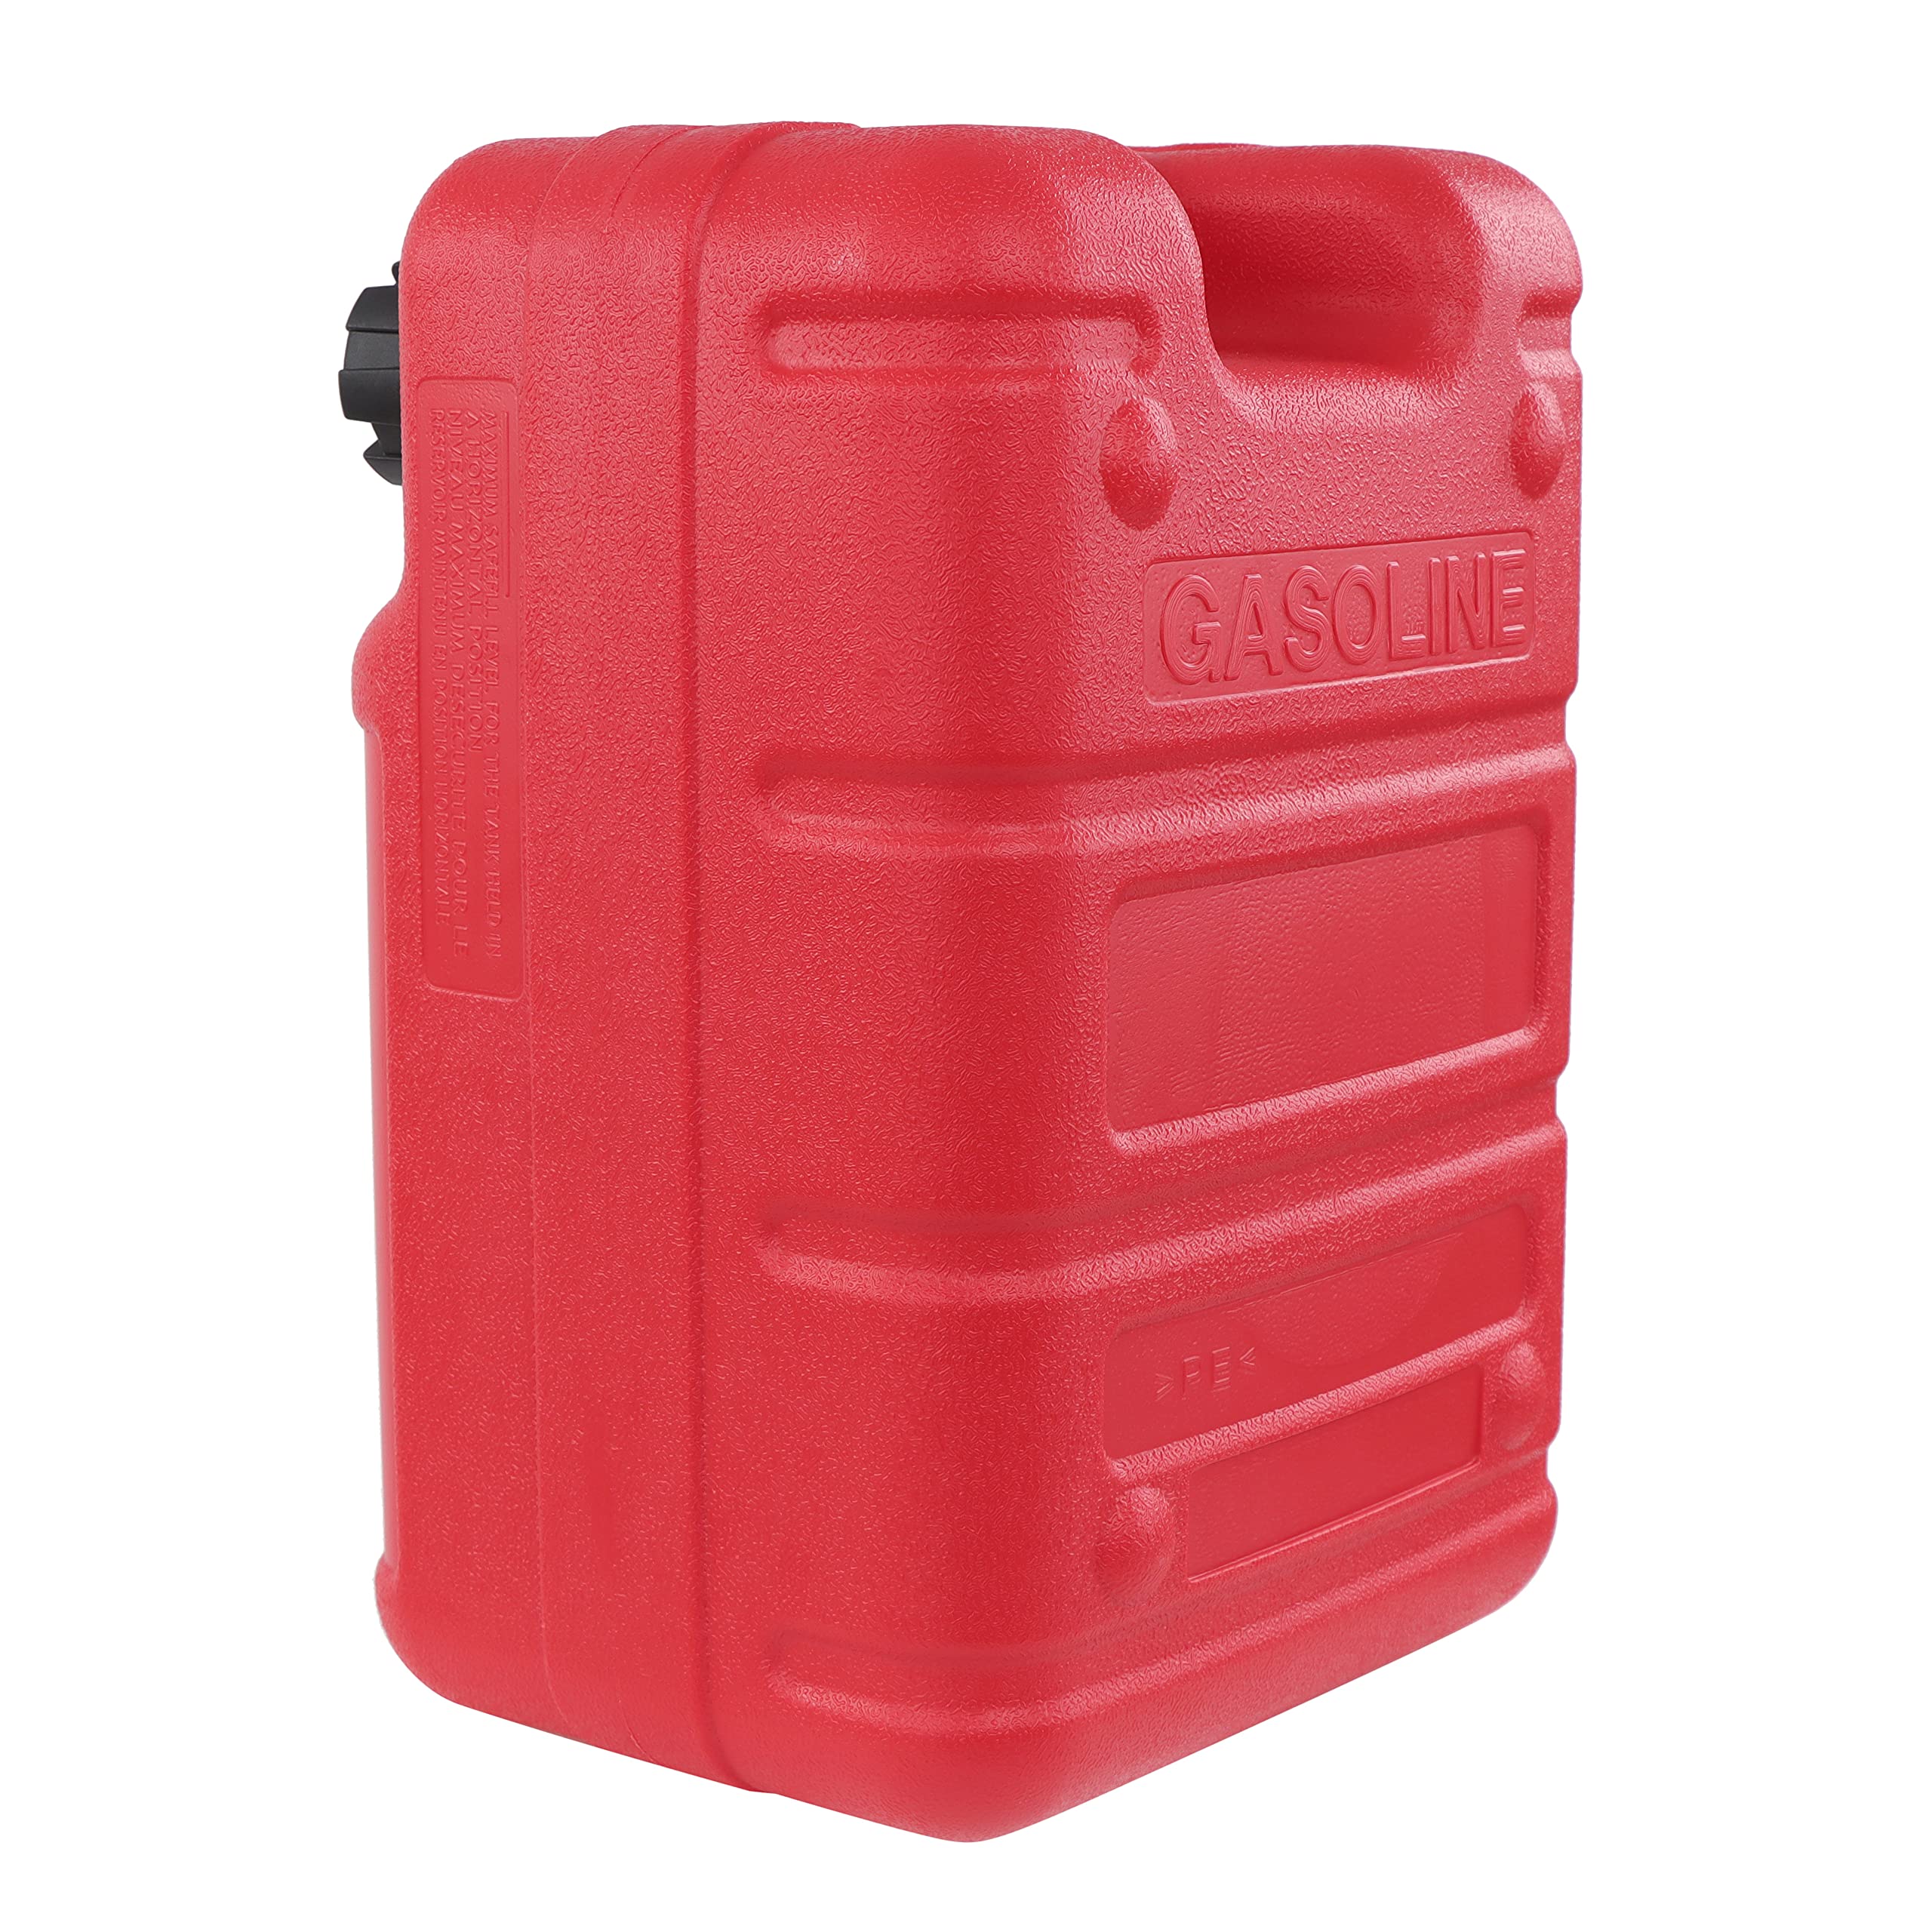 BISupply Portable Boat Fuel Tank, 6gal - 24L Boat Gas Tank, Outboard Marine Portable Fueling Tank Plastic Tank with Hose